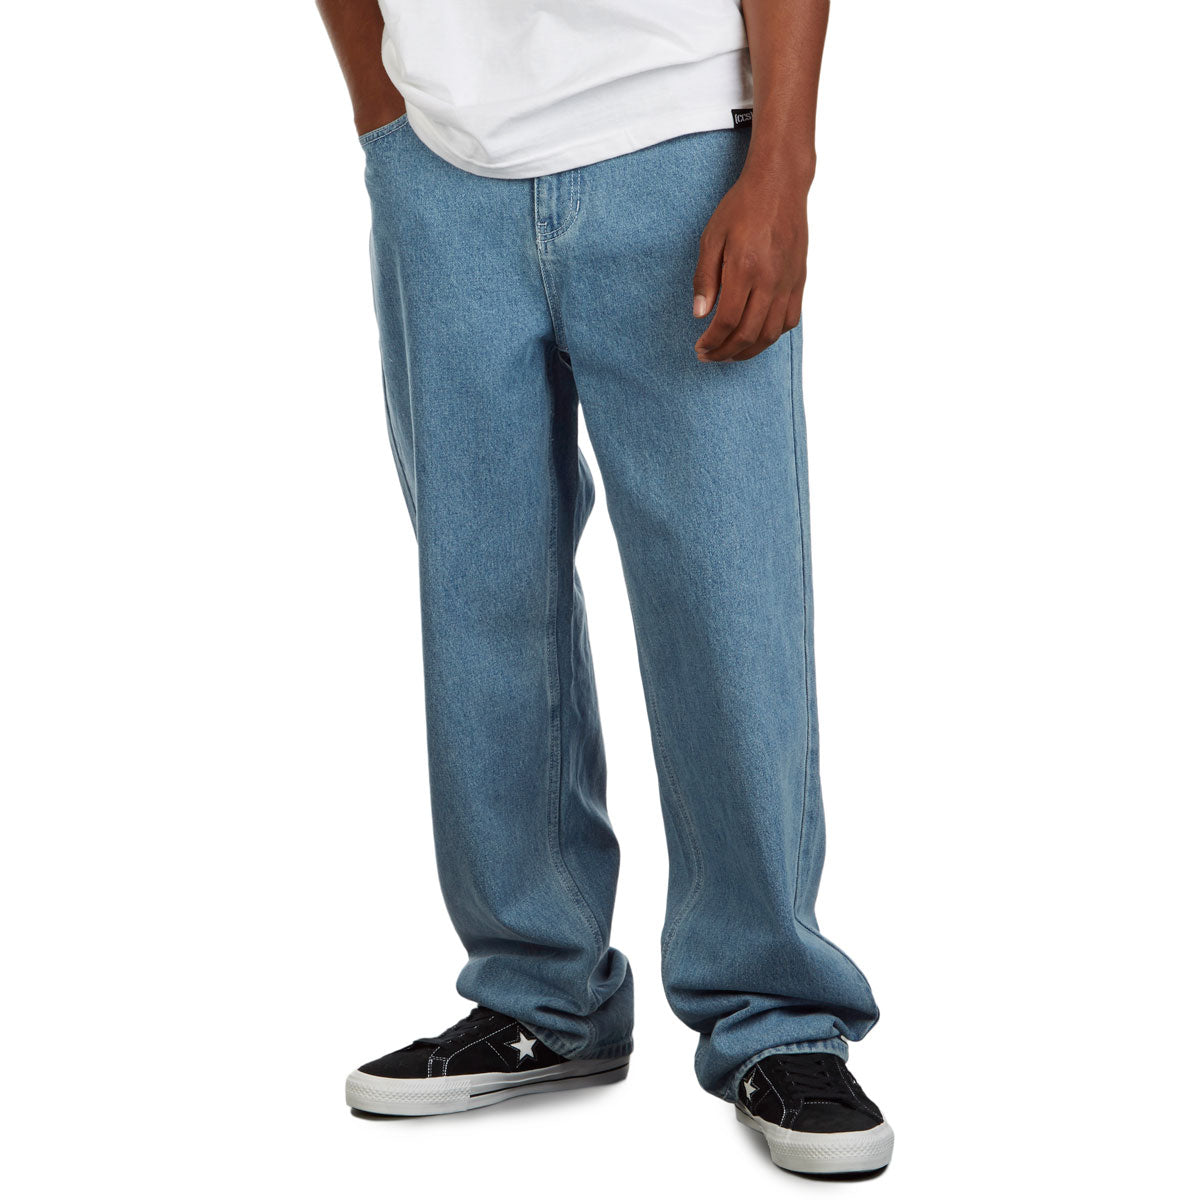 CCS Original Relaxed Denim Jeans - Rinsed Blue image 1